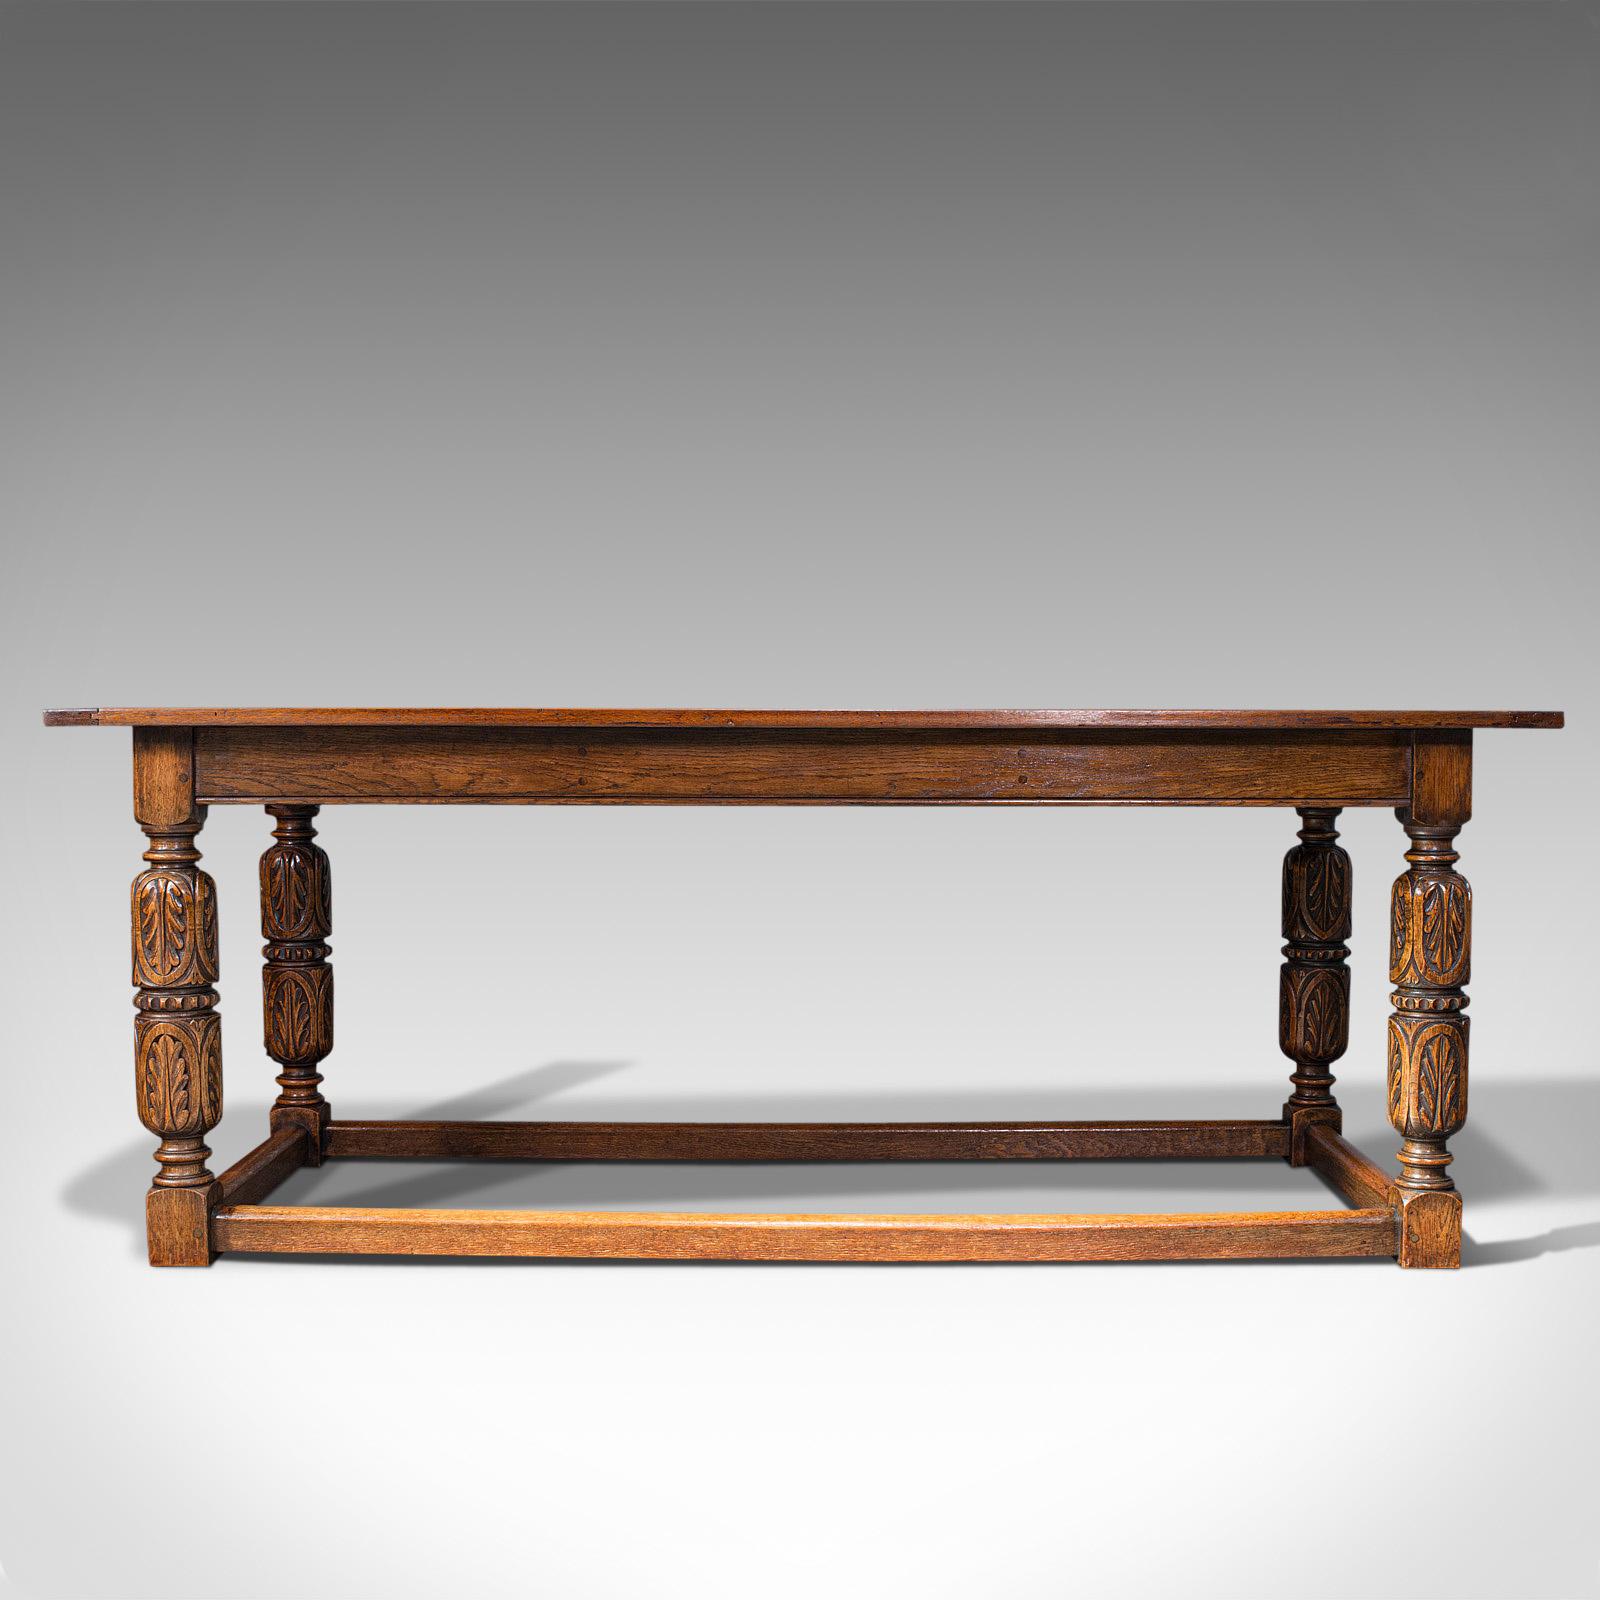 This is a large antique refectory table. An English, 6-8 seat oak dining table with Jacobean revival taste, dating to the Edwardian period, circa 1910.

Classic English country farmhouse form and Jacobean overtones
Displaying a desirable aged